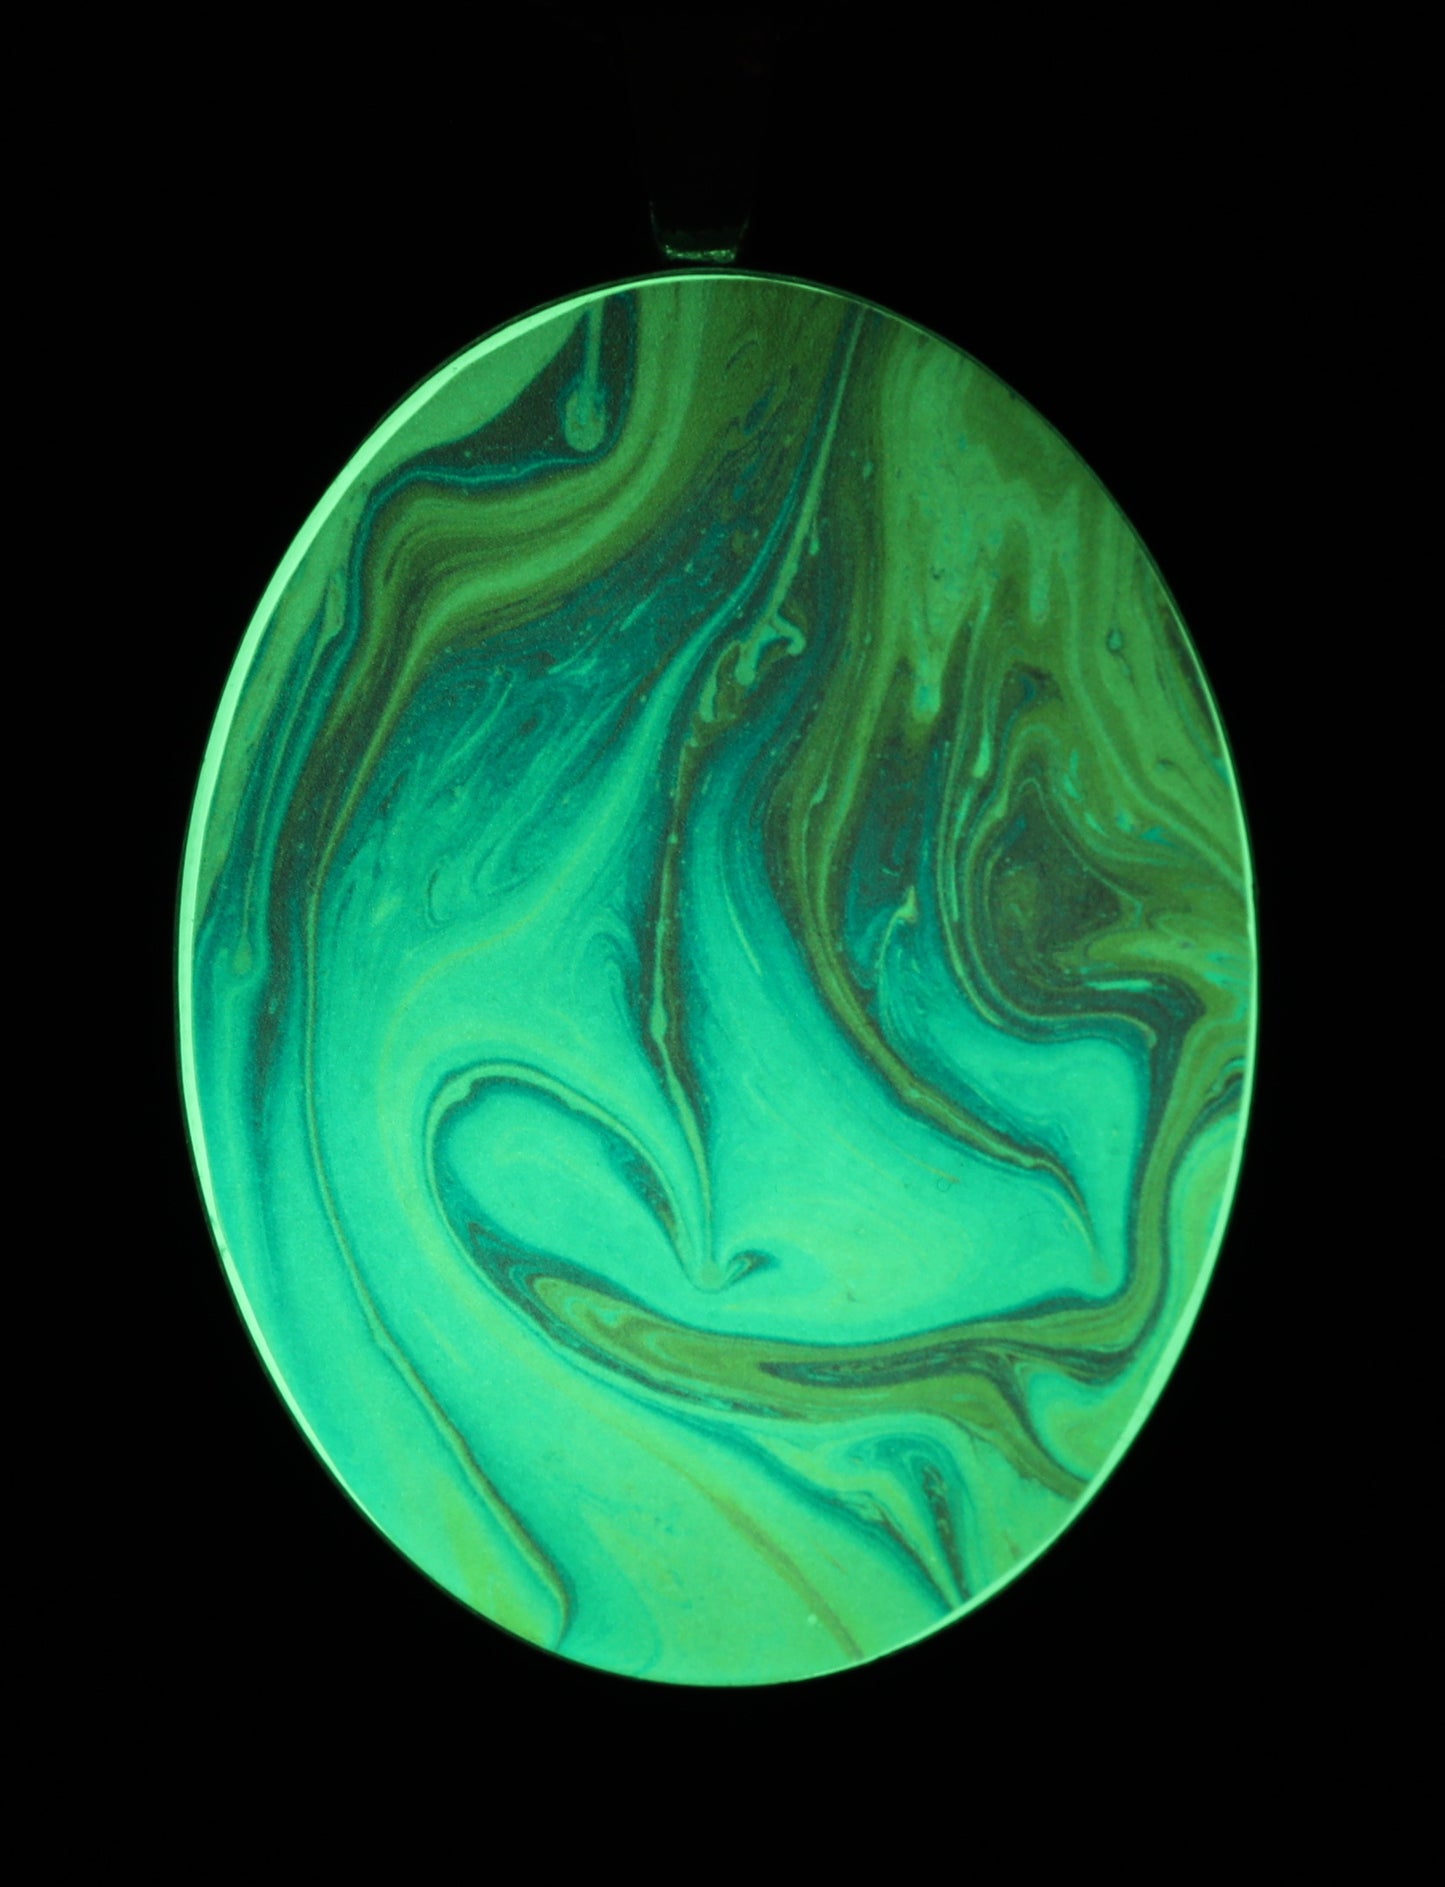 Walking on Clouds  - Glow-in-the-dark pendant with a beautiful abstract soap film pattern